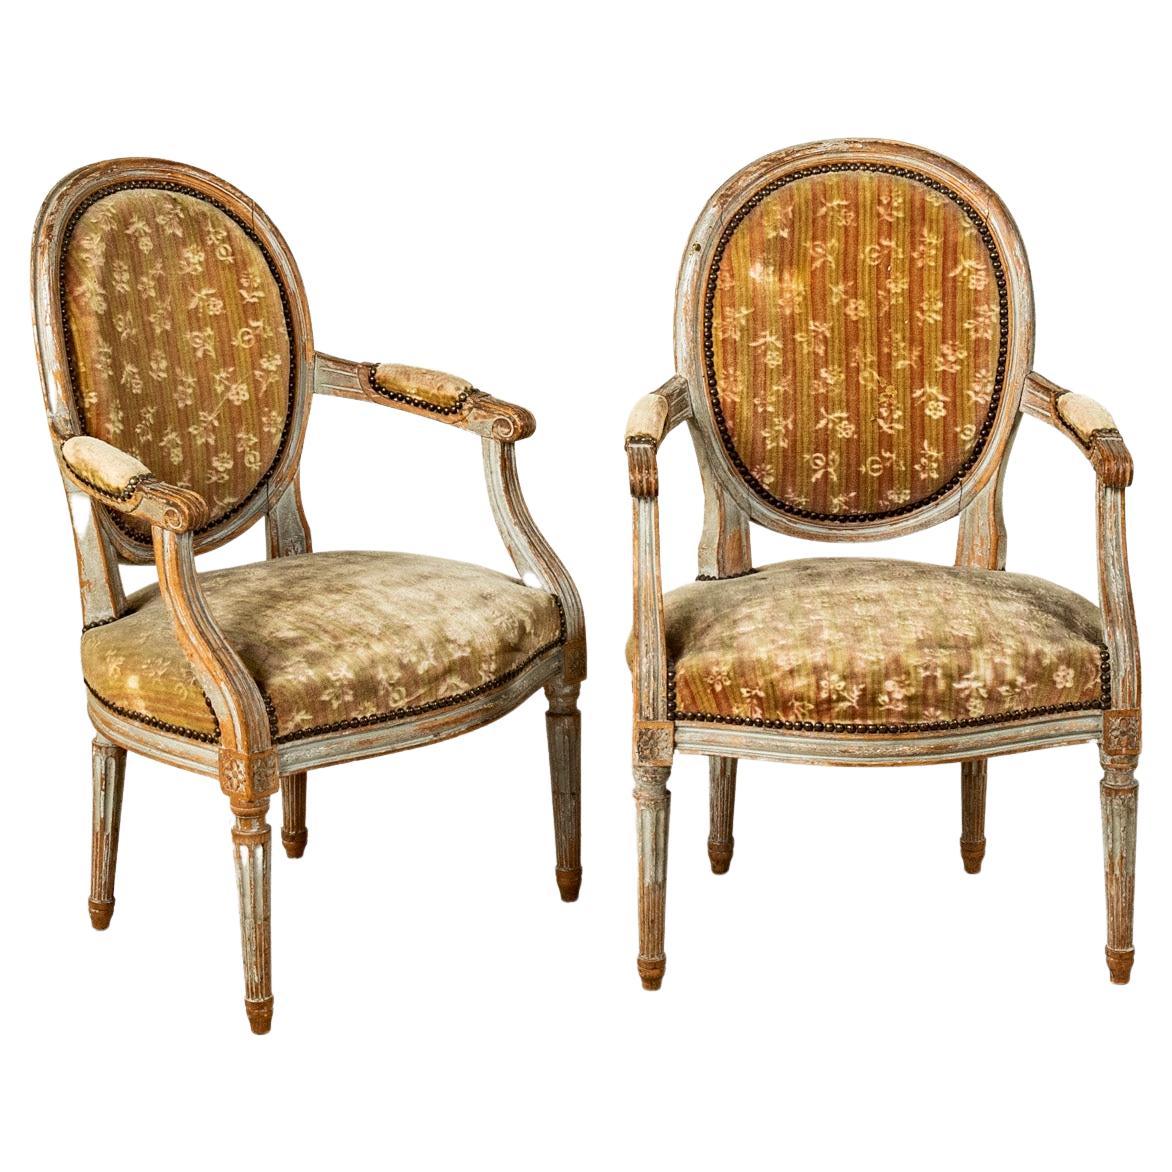 Late 18th Century French Louis XVI Period Hand Carved Walnut Armchairs For Sale